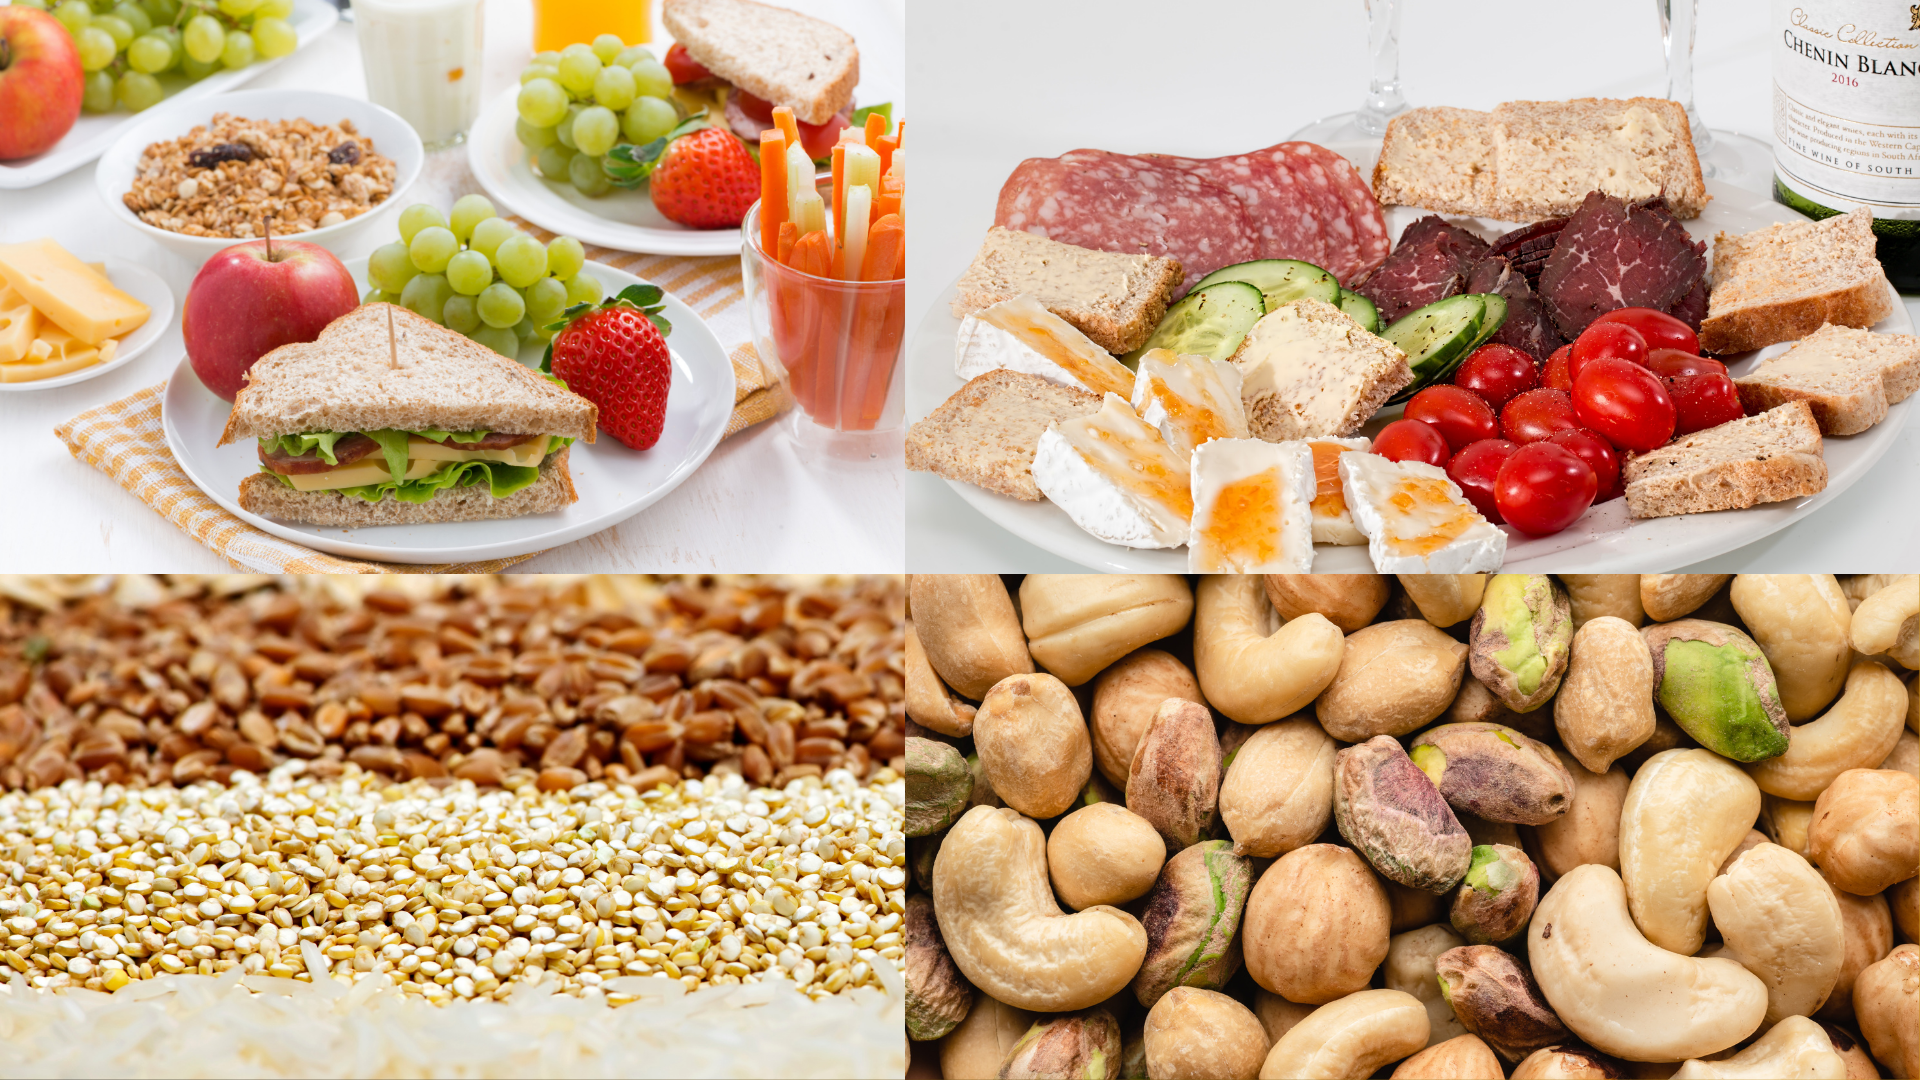 Maximizing Athletic Performance: The Top 10 Foods Every Athlete Should Include in Their Diet